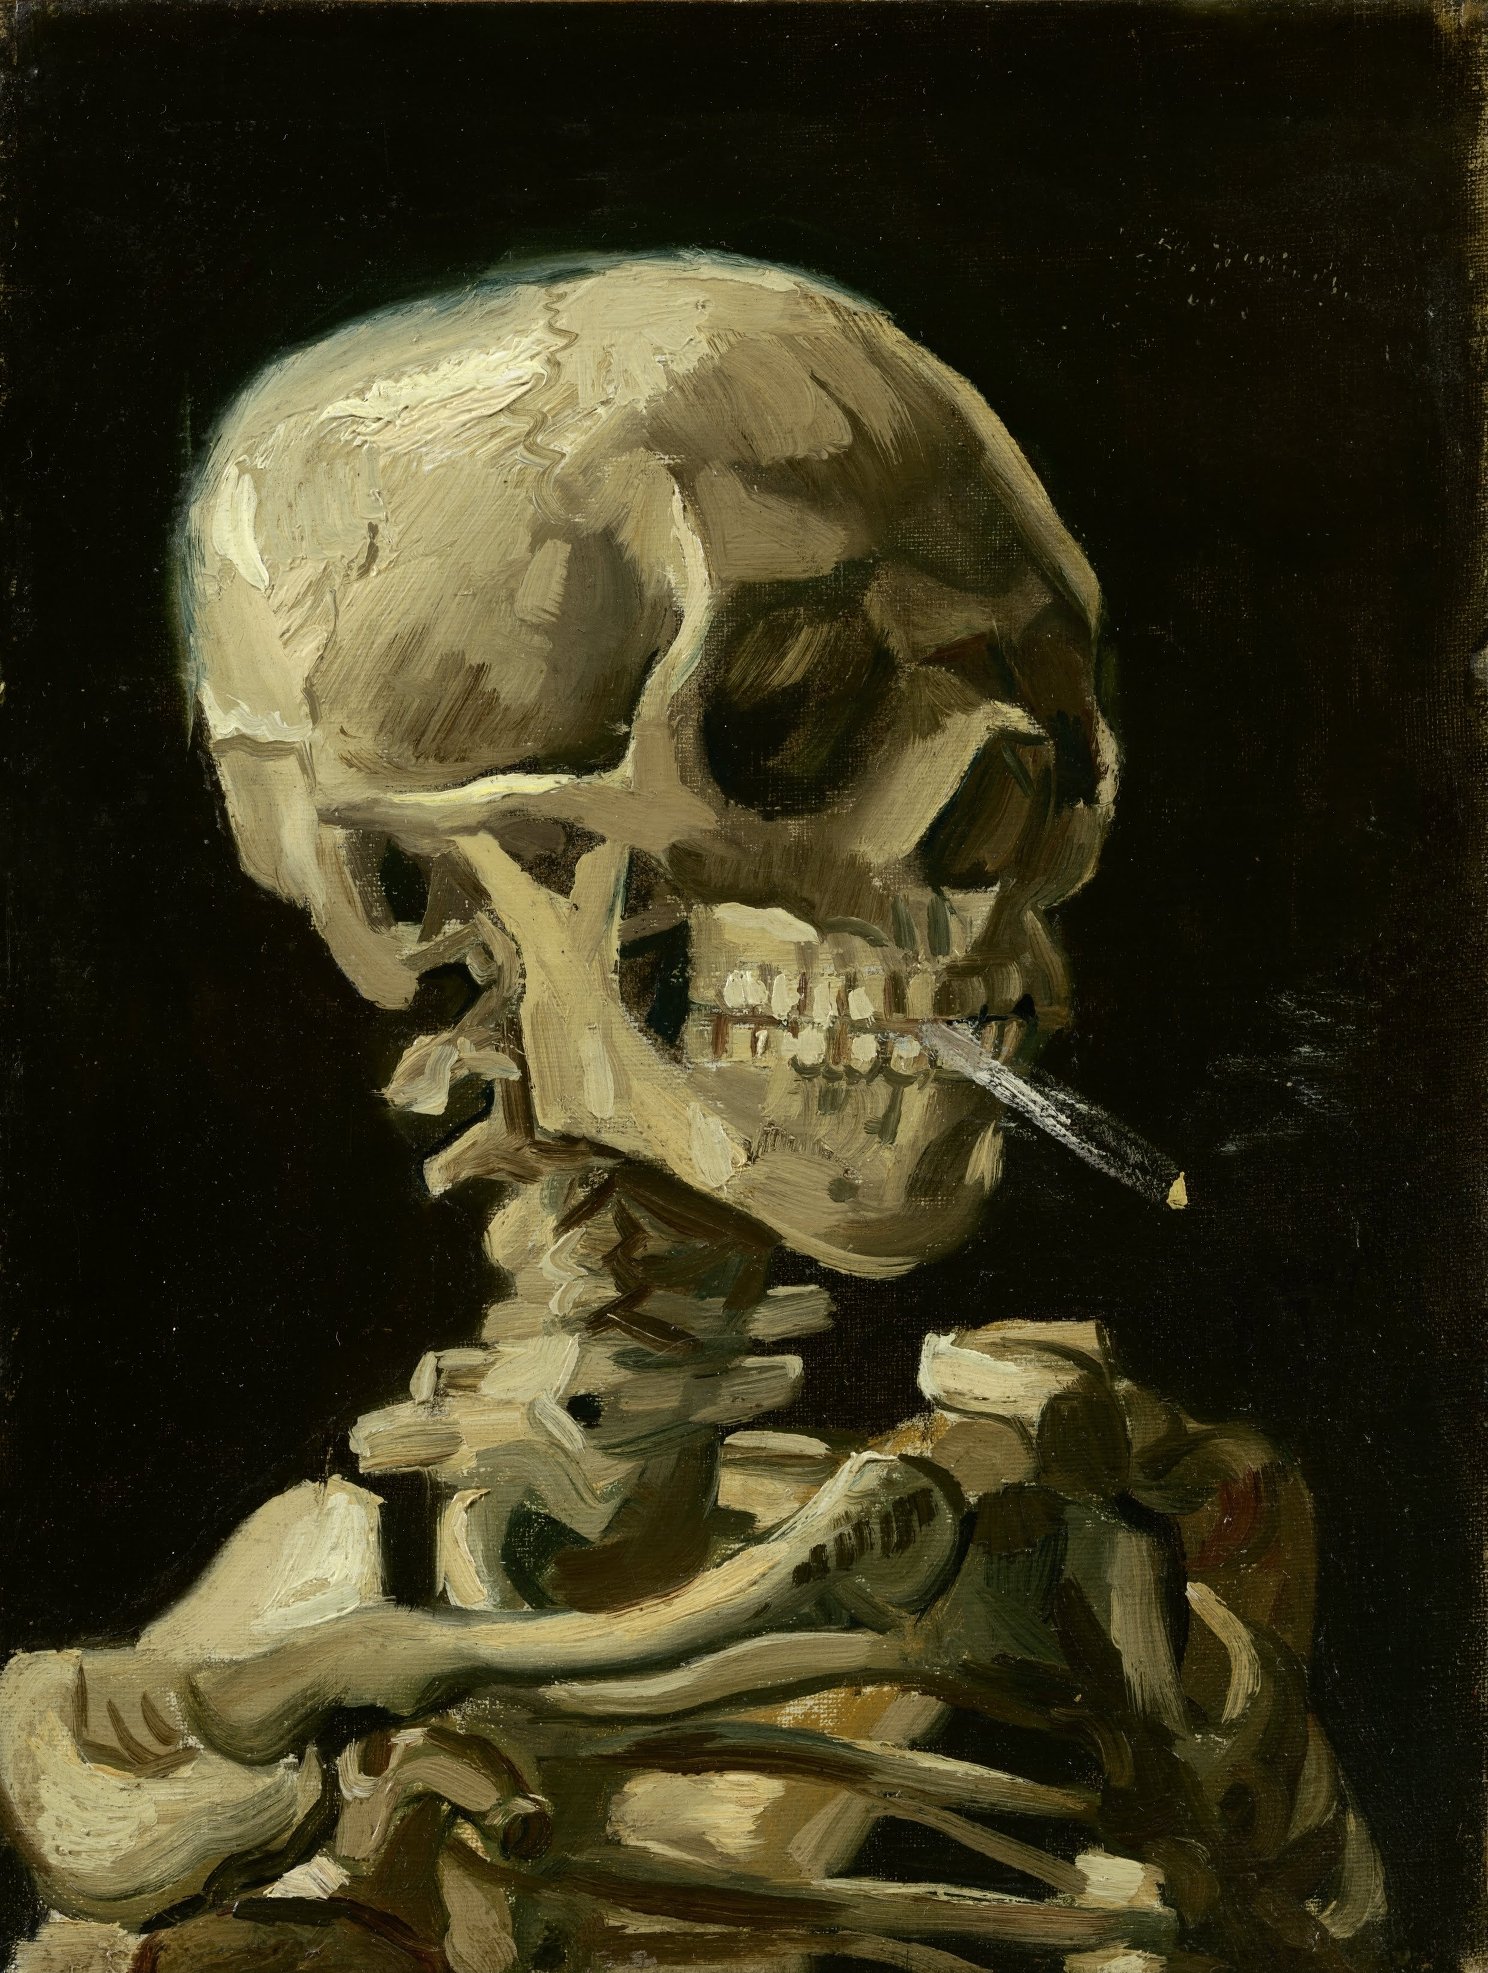 Head Of A Skeleton With A Burning Cigarettez
(Happy Halloween!)